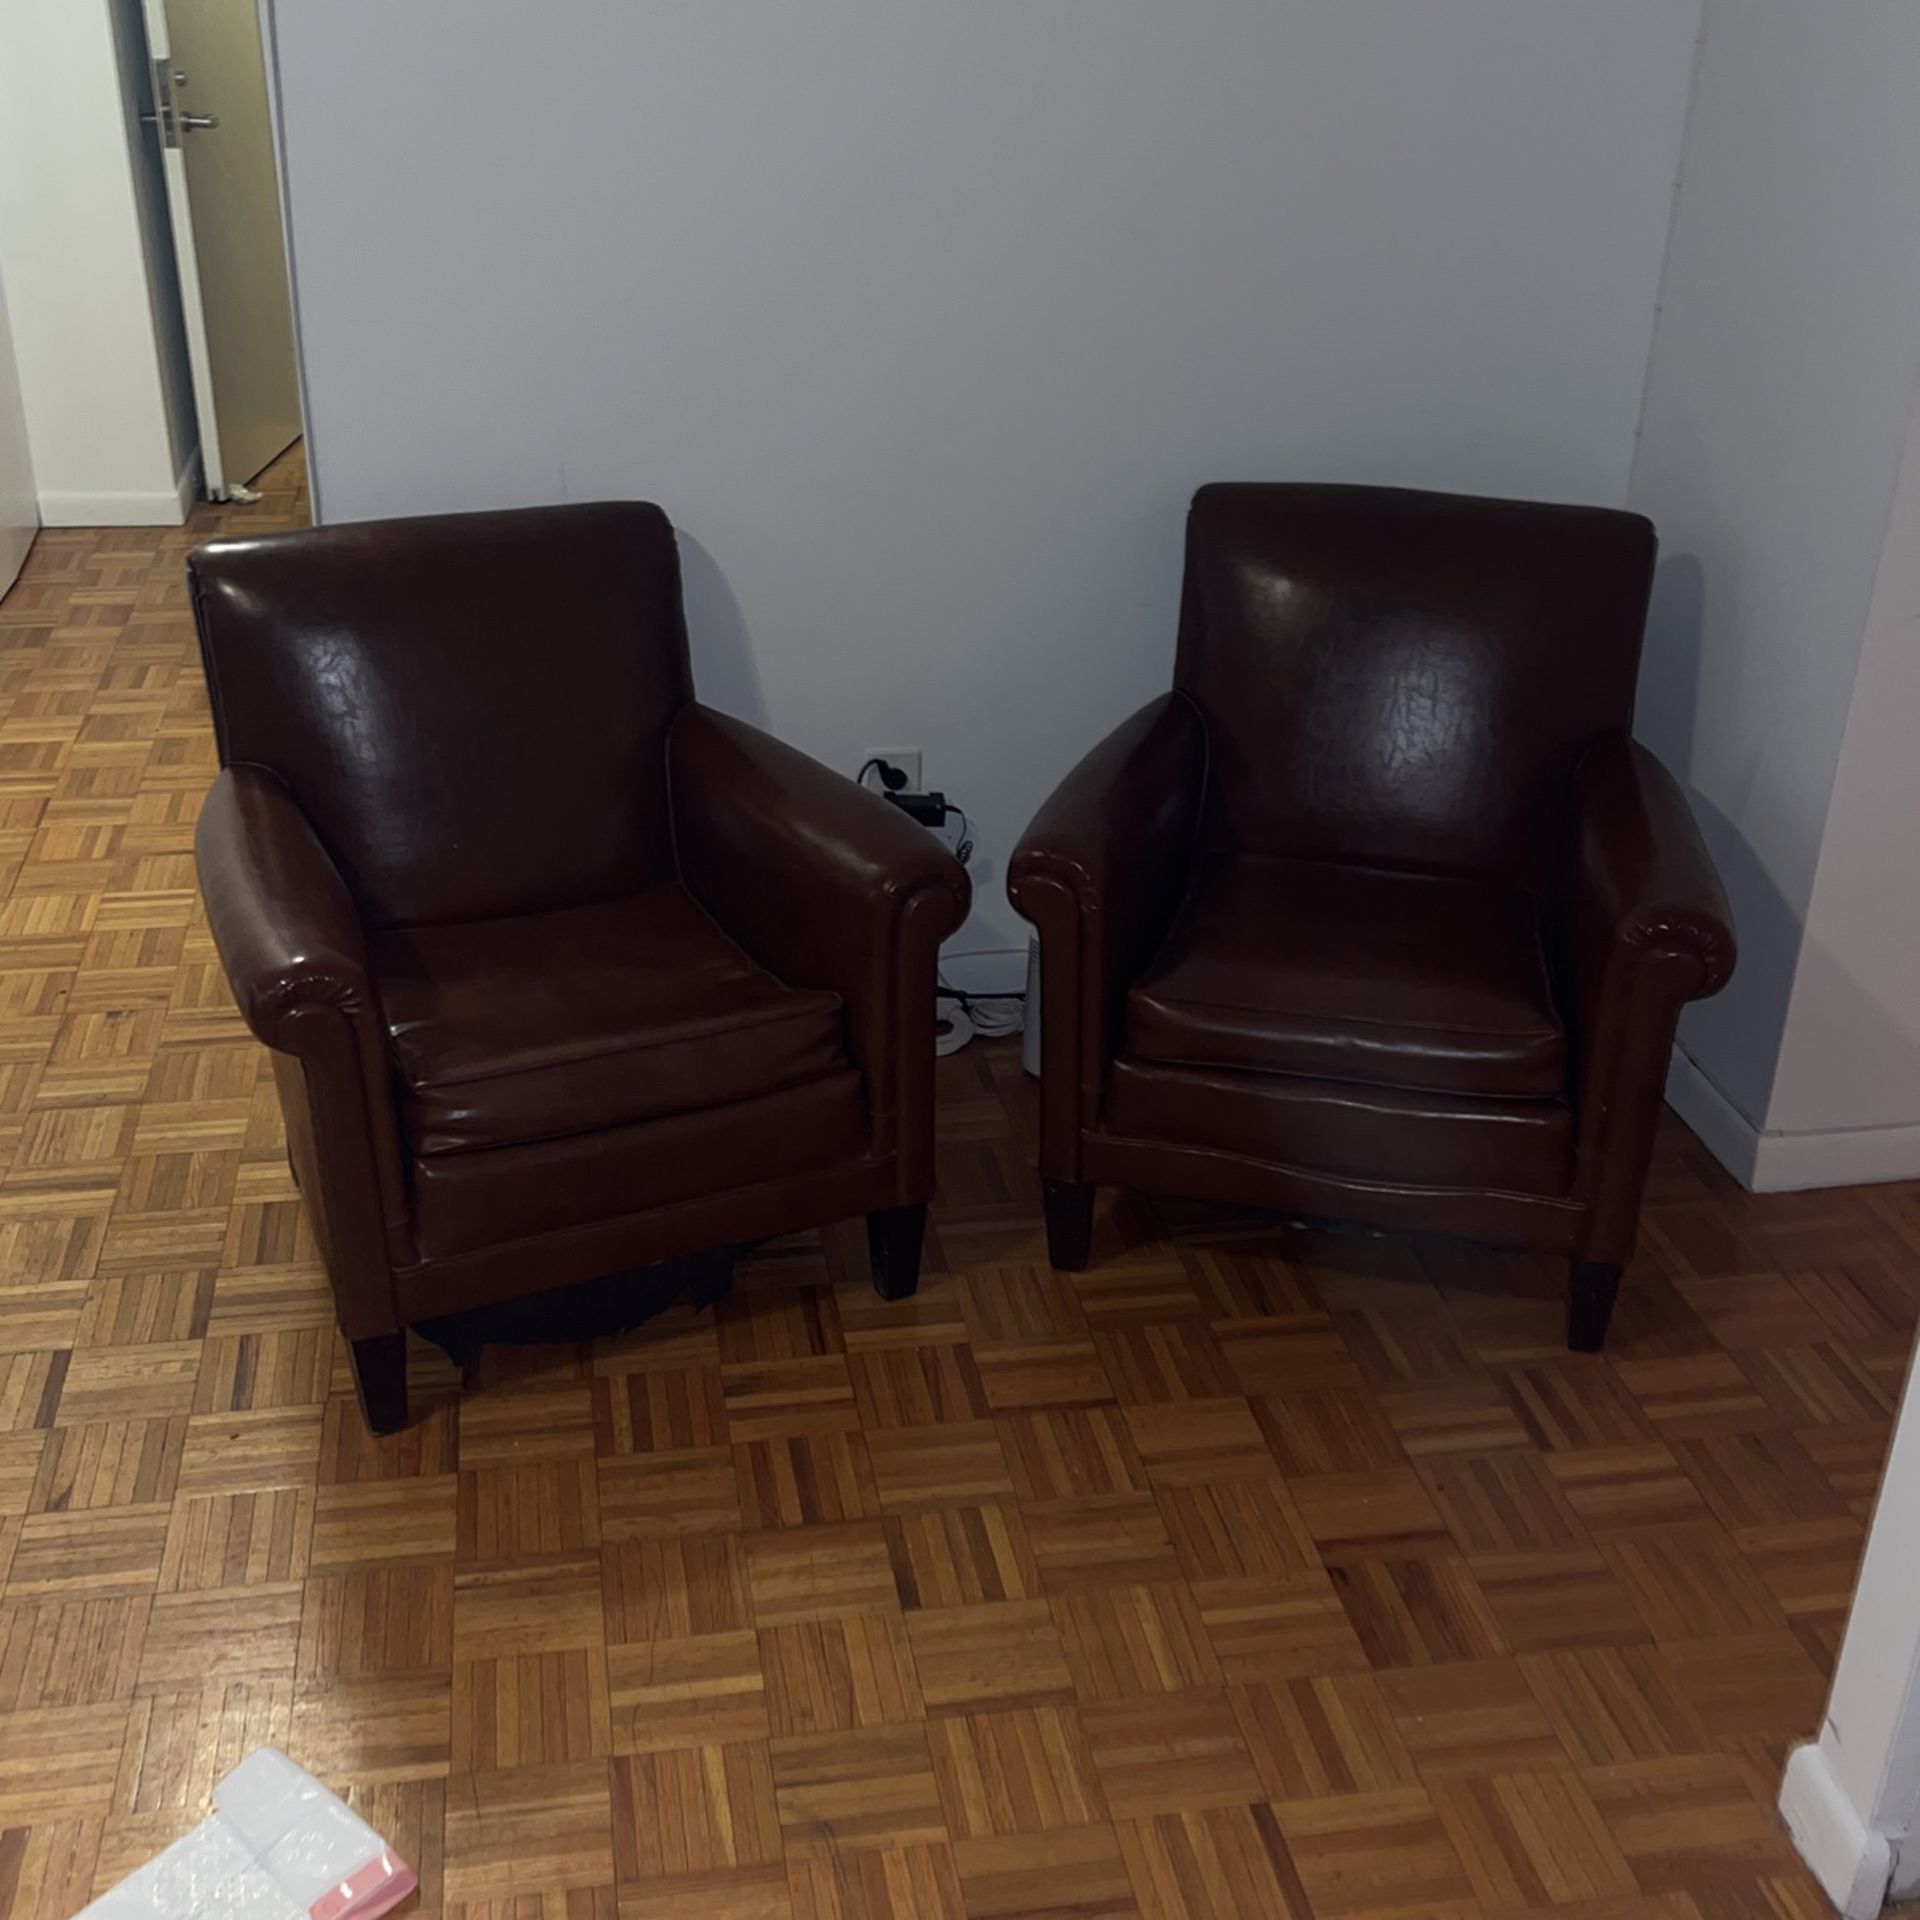 Leather Sofa Chairs (2) - Small